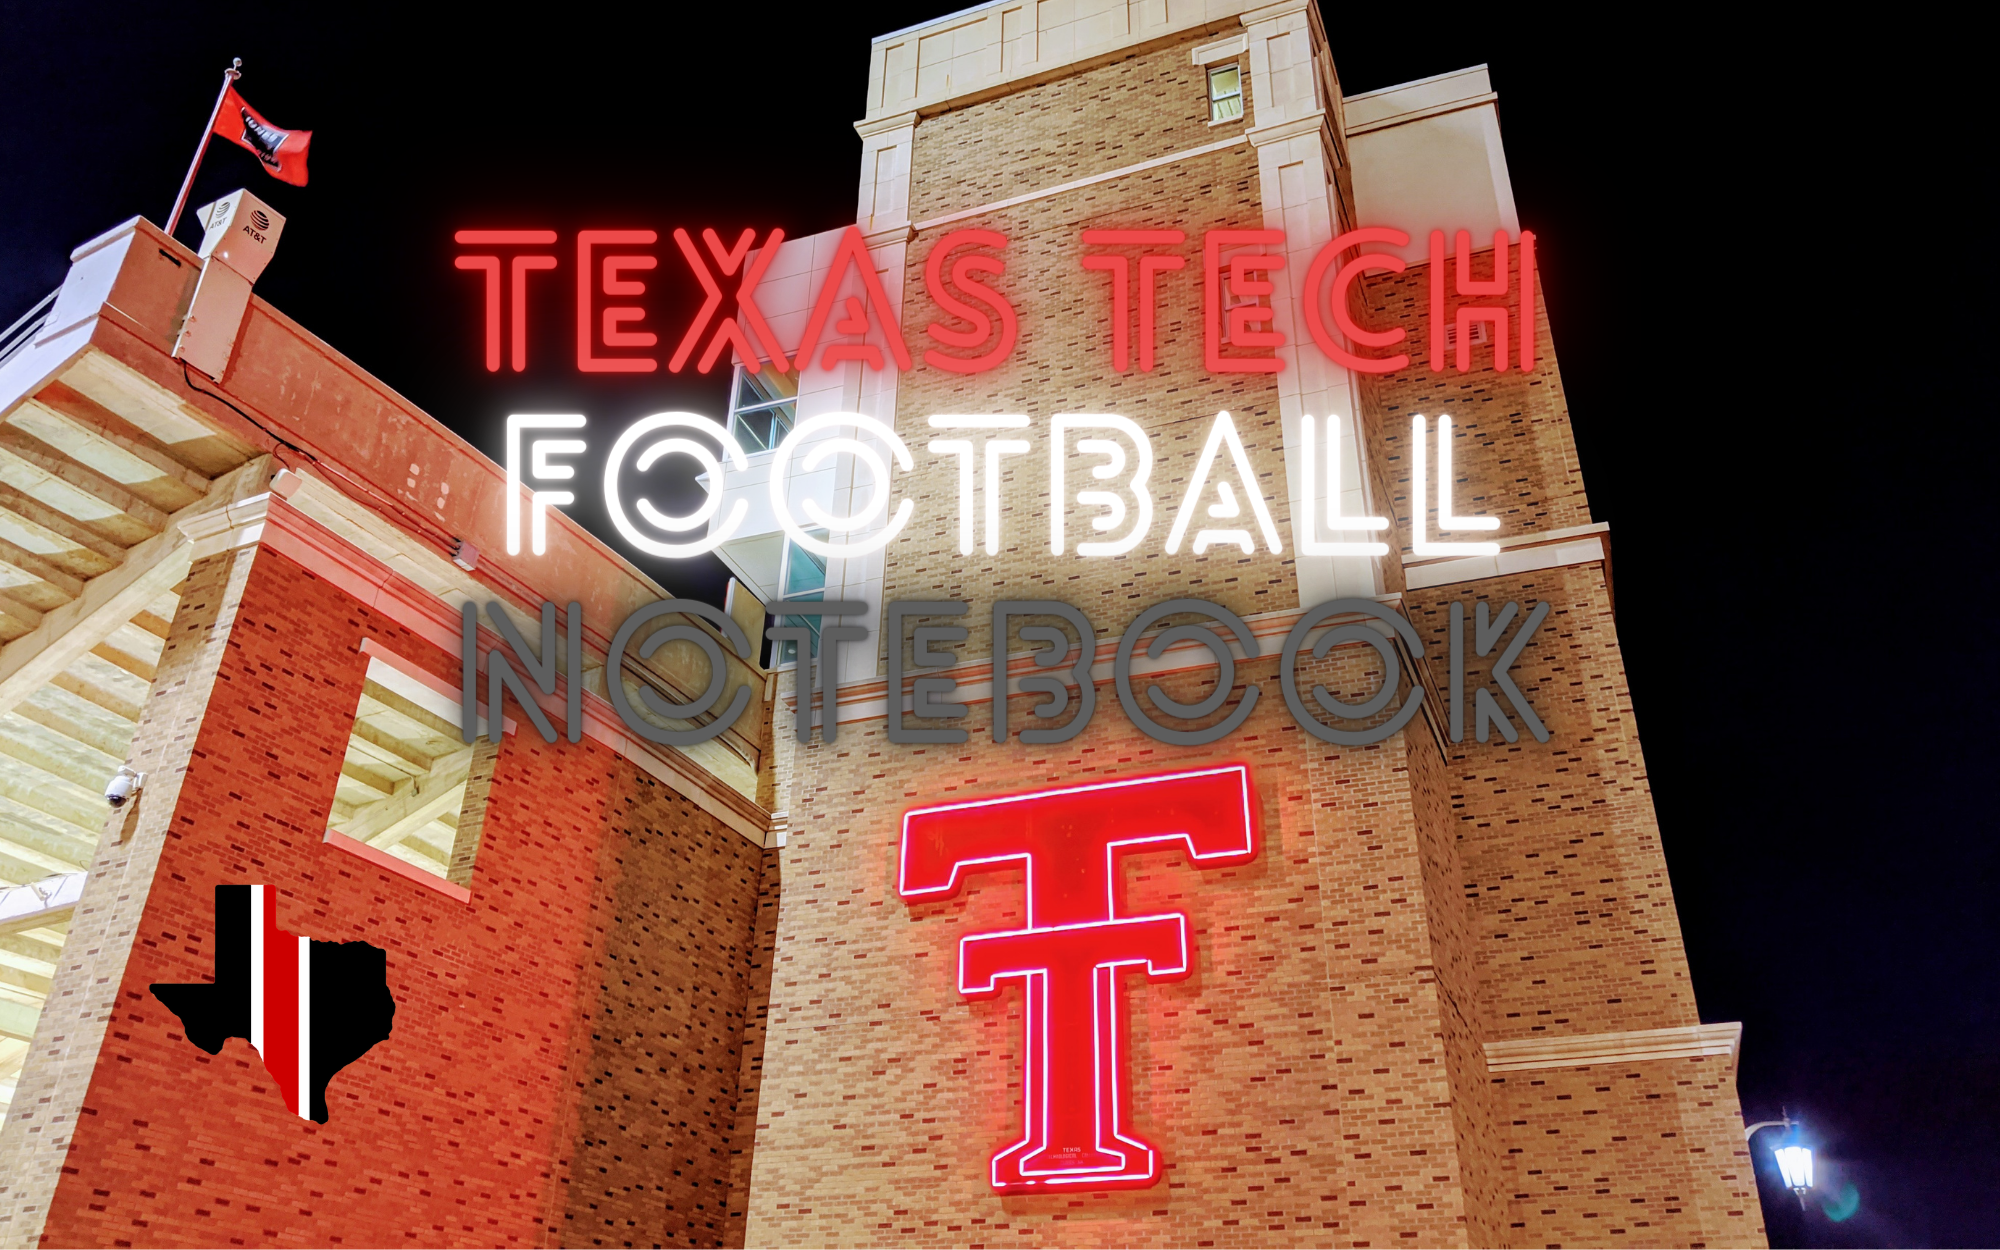 Texas Tech Football Notebook: Oklahoma State Game Day Links